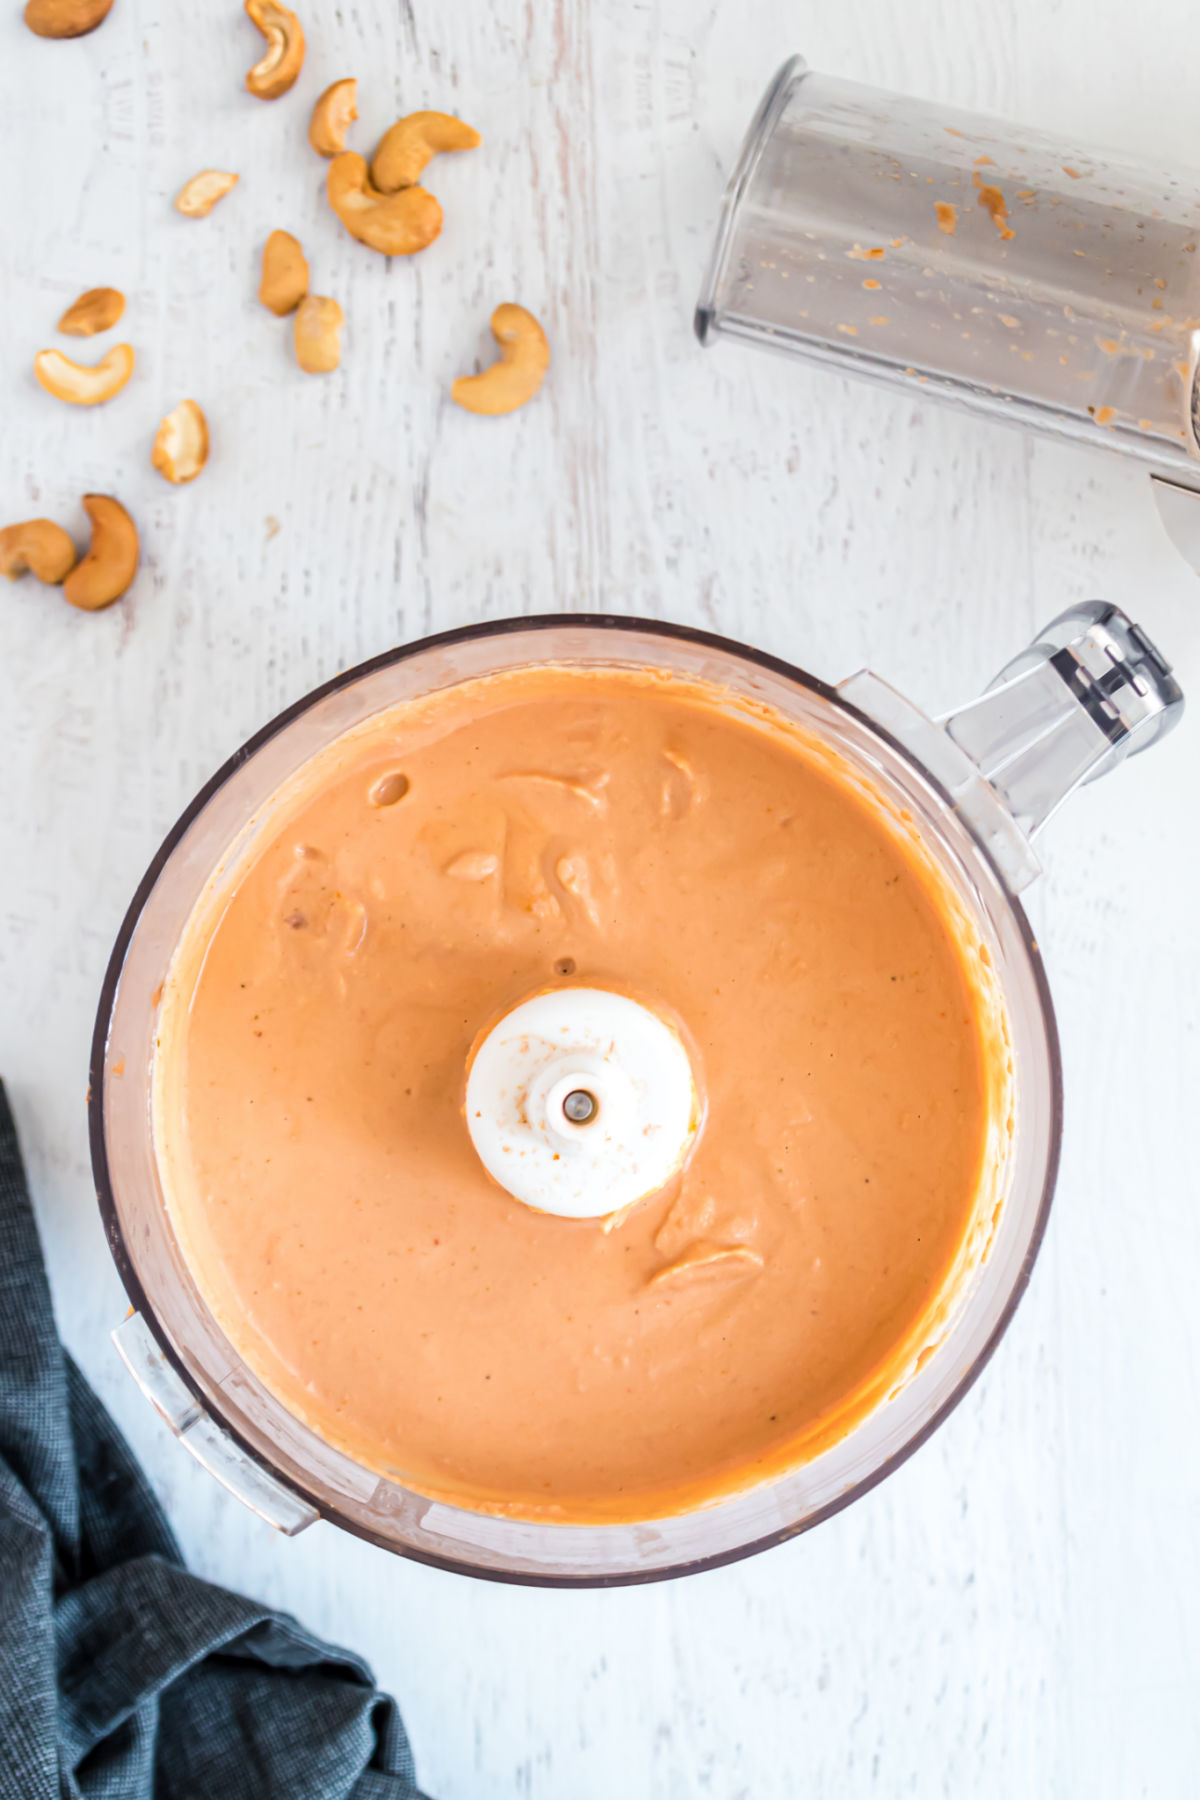 Cashew queso blended smooth in a food processor.